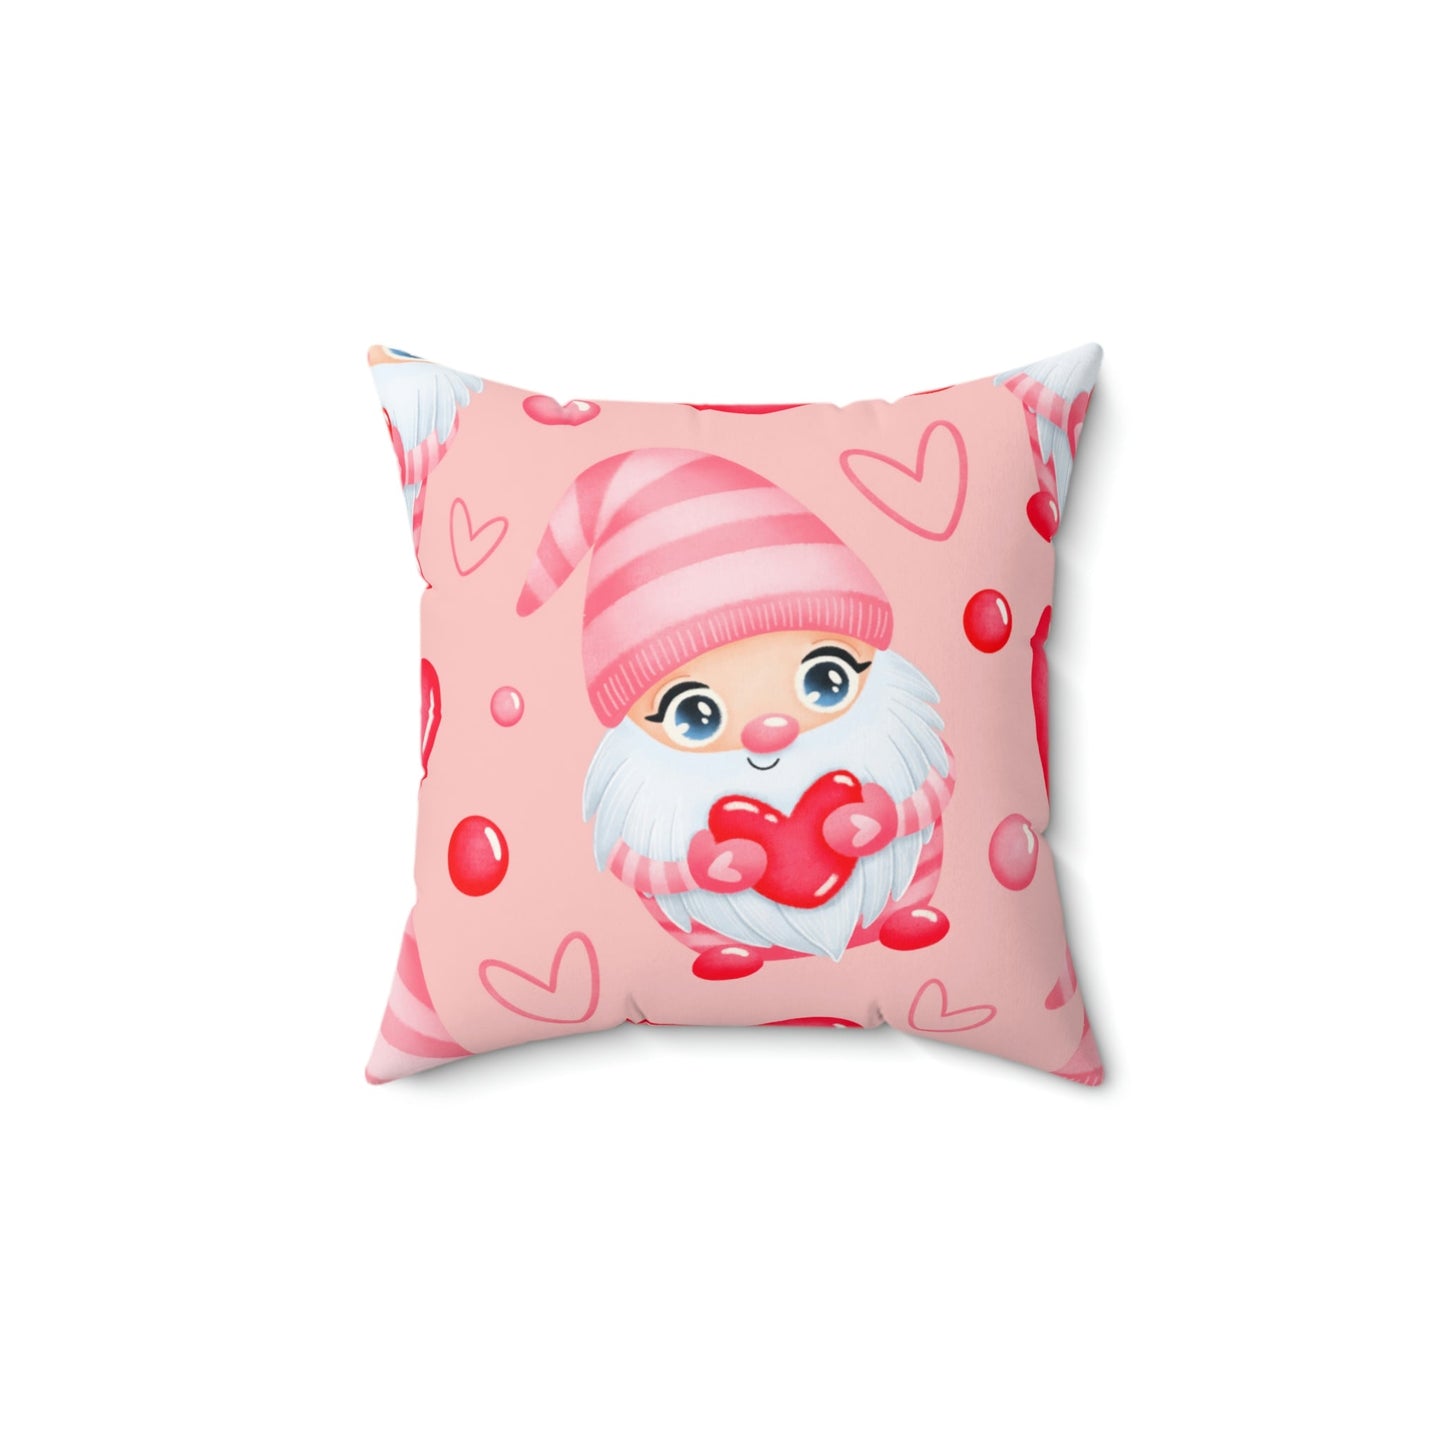 Gnomes in Love Square Pillow Home Decor Pink Sweetheart